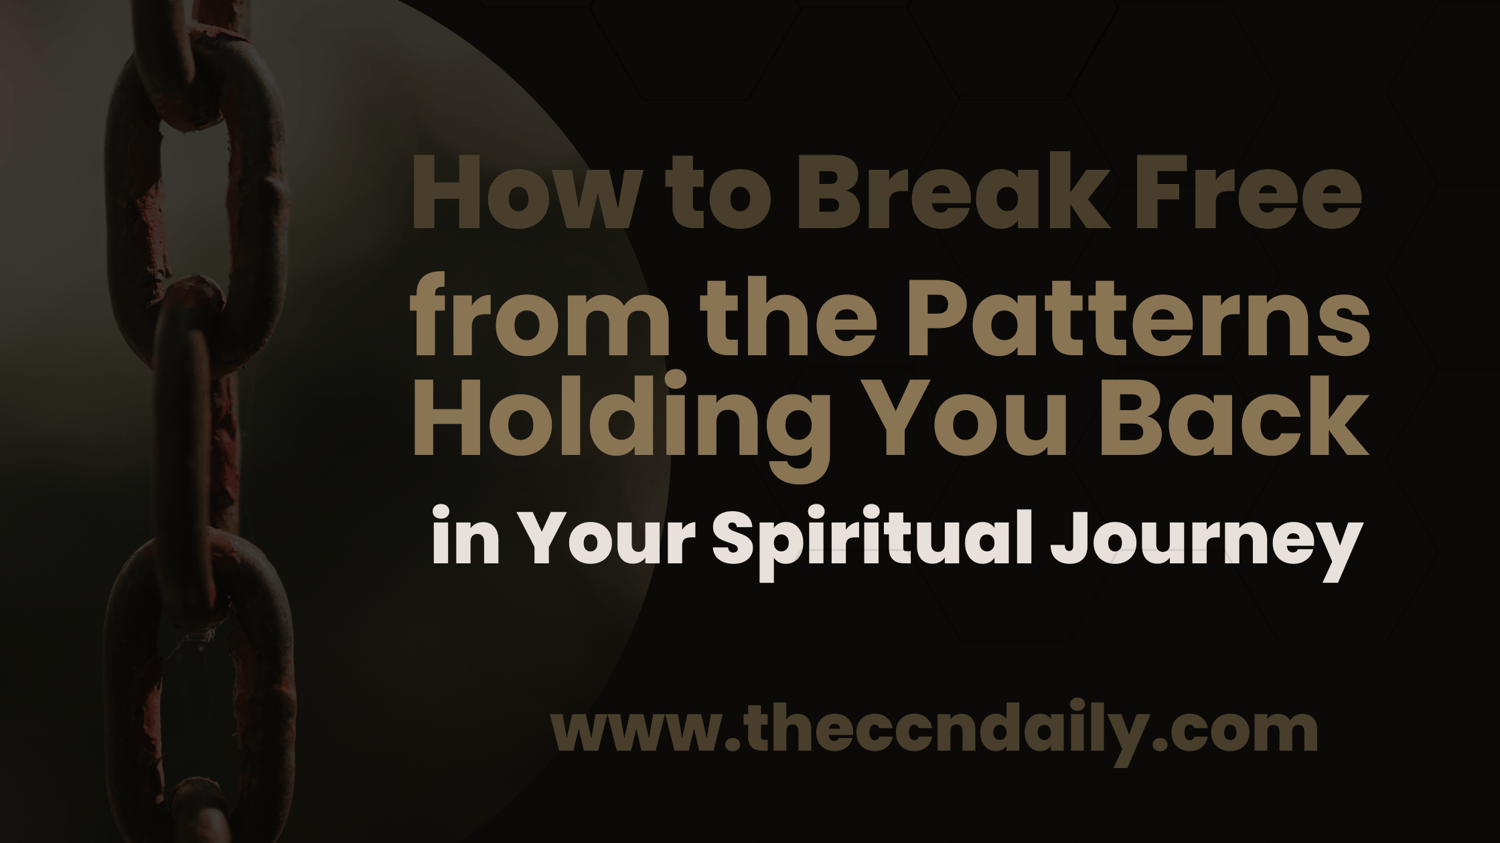 How to Break free from the Patterns Holding You Back In your spiritual journey.